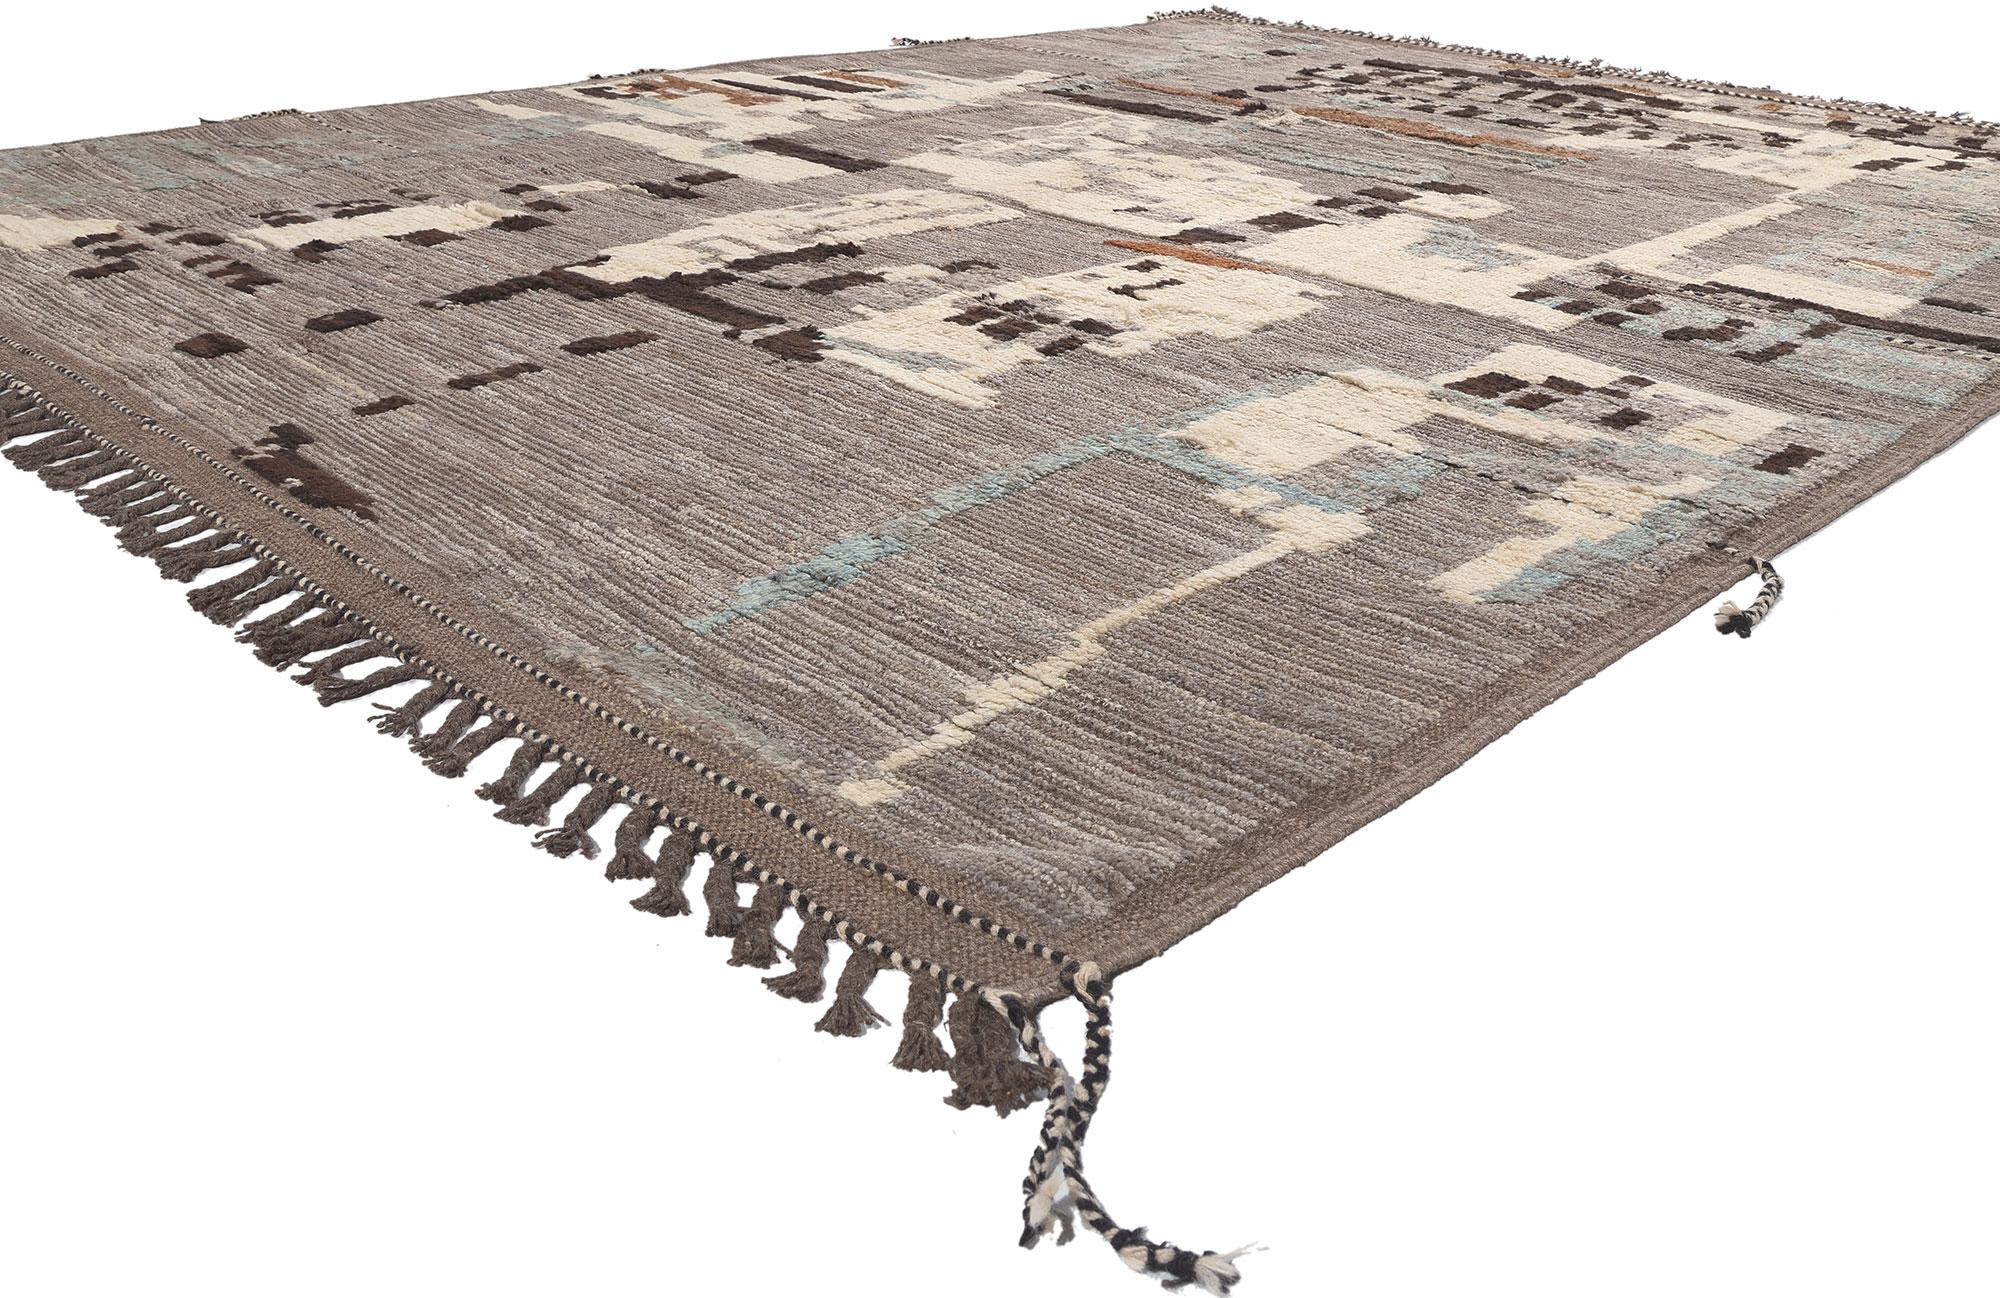 80982 Modern Moroccan Rug with Earth-Tone Colors, 09'00 x 11'09. Emanating Biophilic Design with incredible detail and texture, this large Moroccan high-low rug is a captivating vision of woven beauty. The raised design and earthy colorway woven